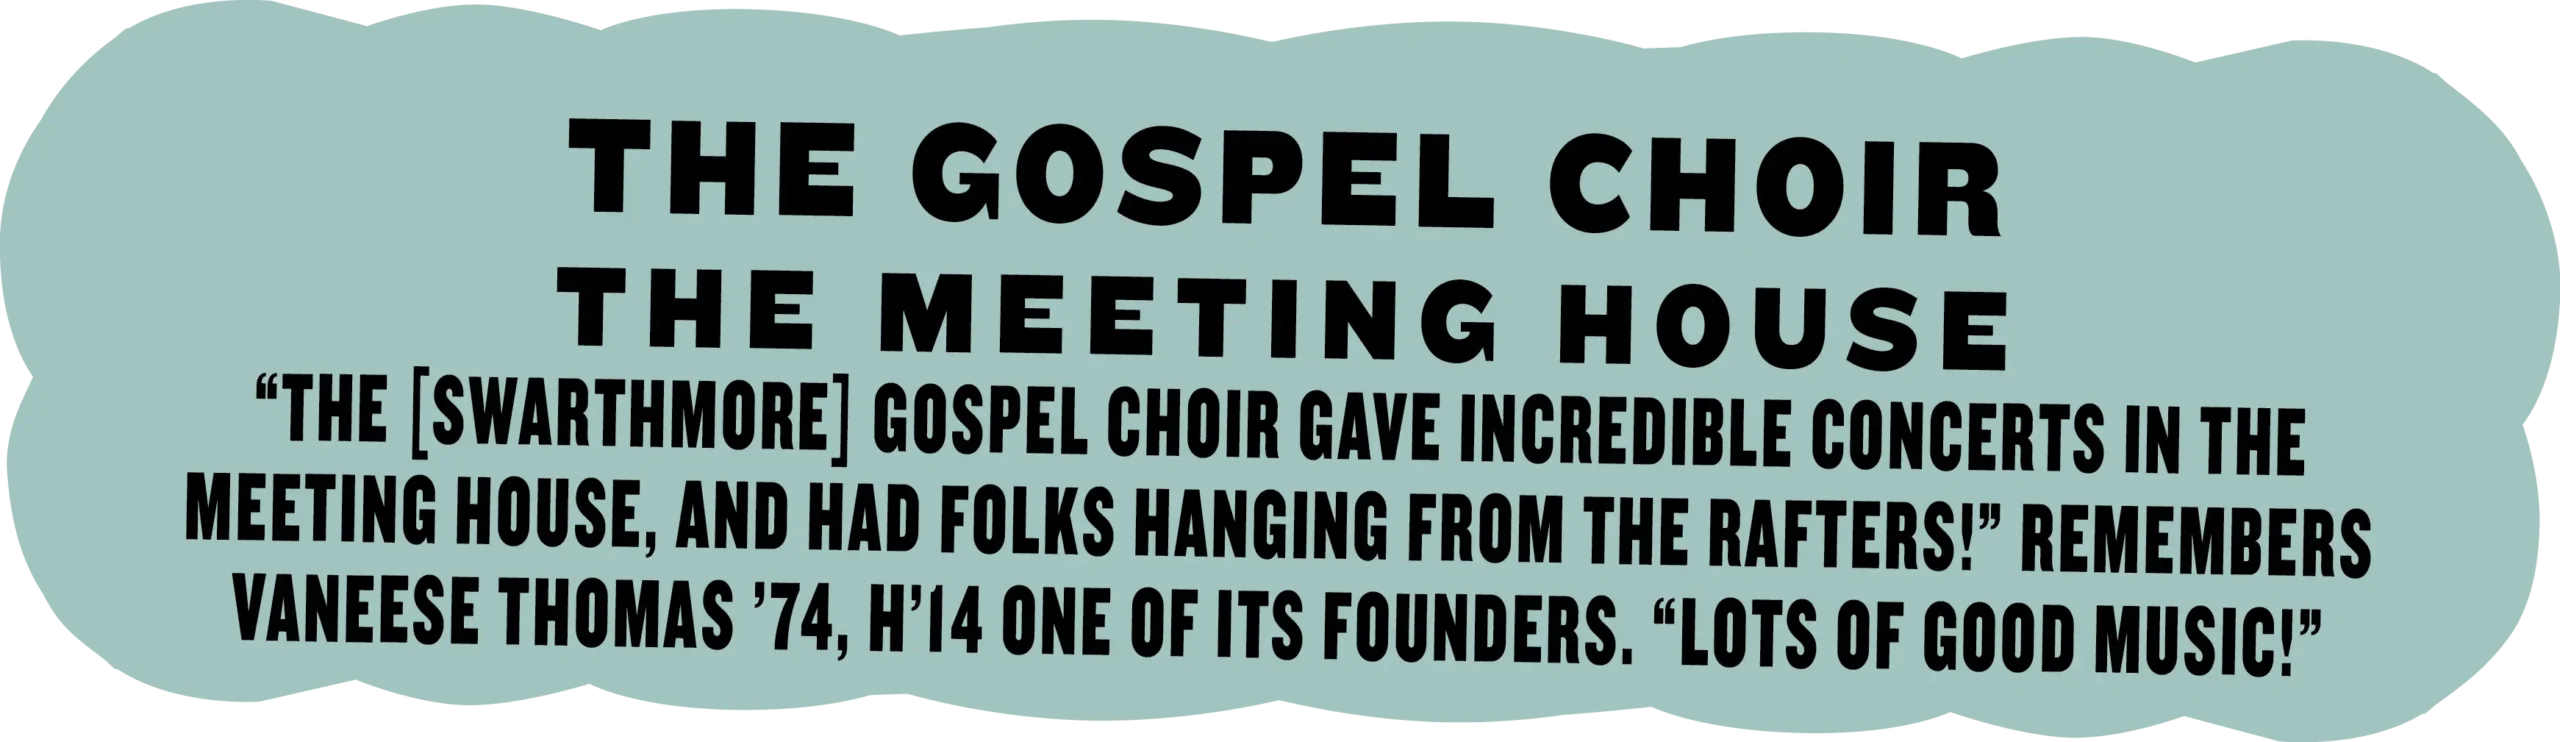 The Gospel Choir, The Meeting House; “The [Swarthmore] Gospel Choir gave incredible concerts in the Meeting House, and had folks hanging from the rafters!” remembers Vaneese Thomas ’74, H’14 one of its founders. “Lots of good music!”